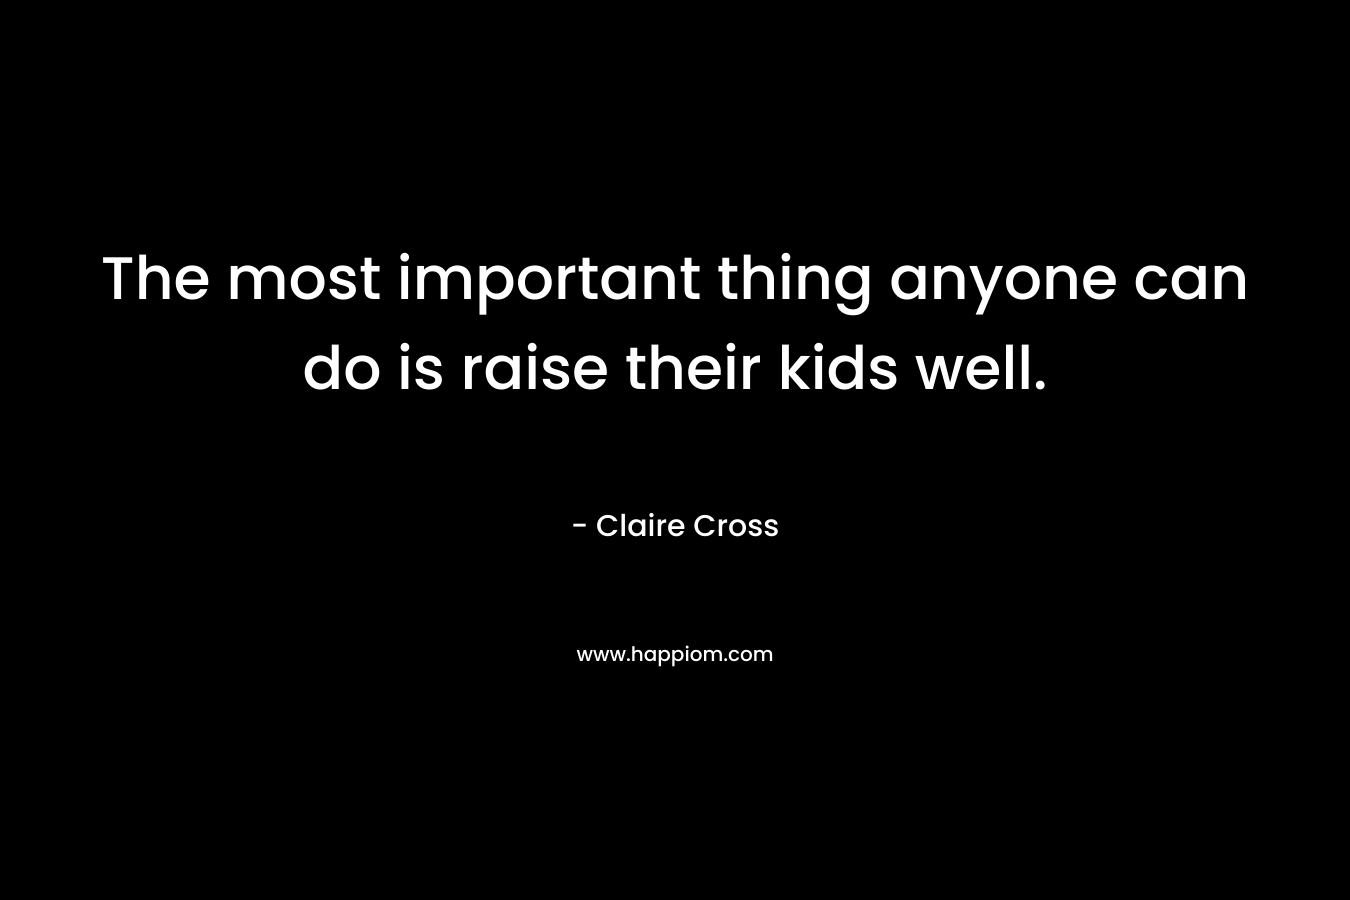 The most important thing anyone can do is raise their kids well. – Claire Cross